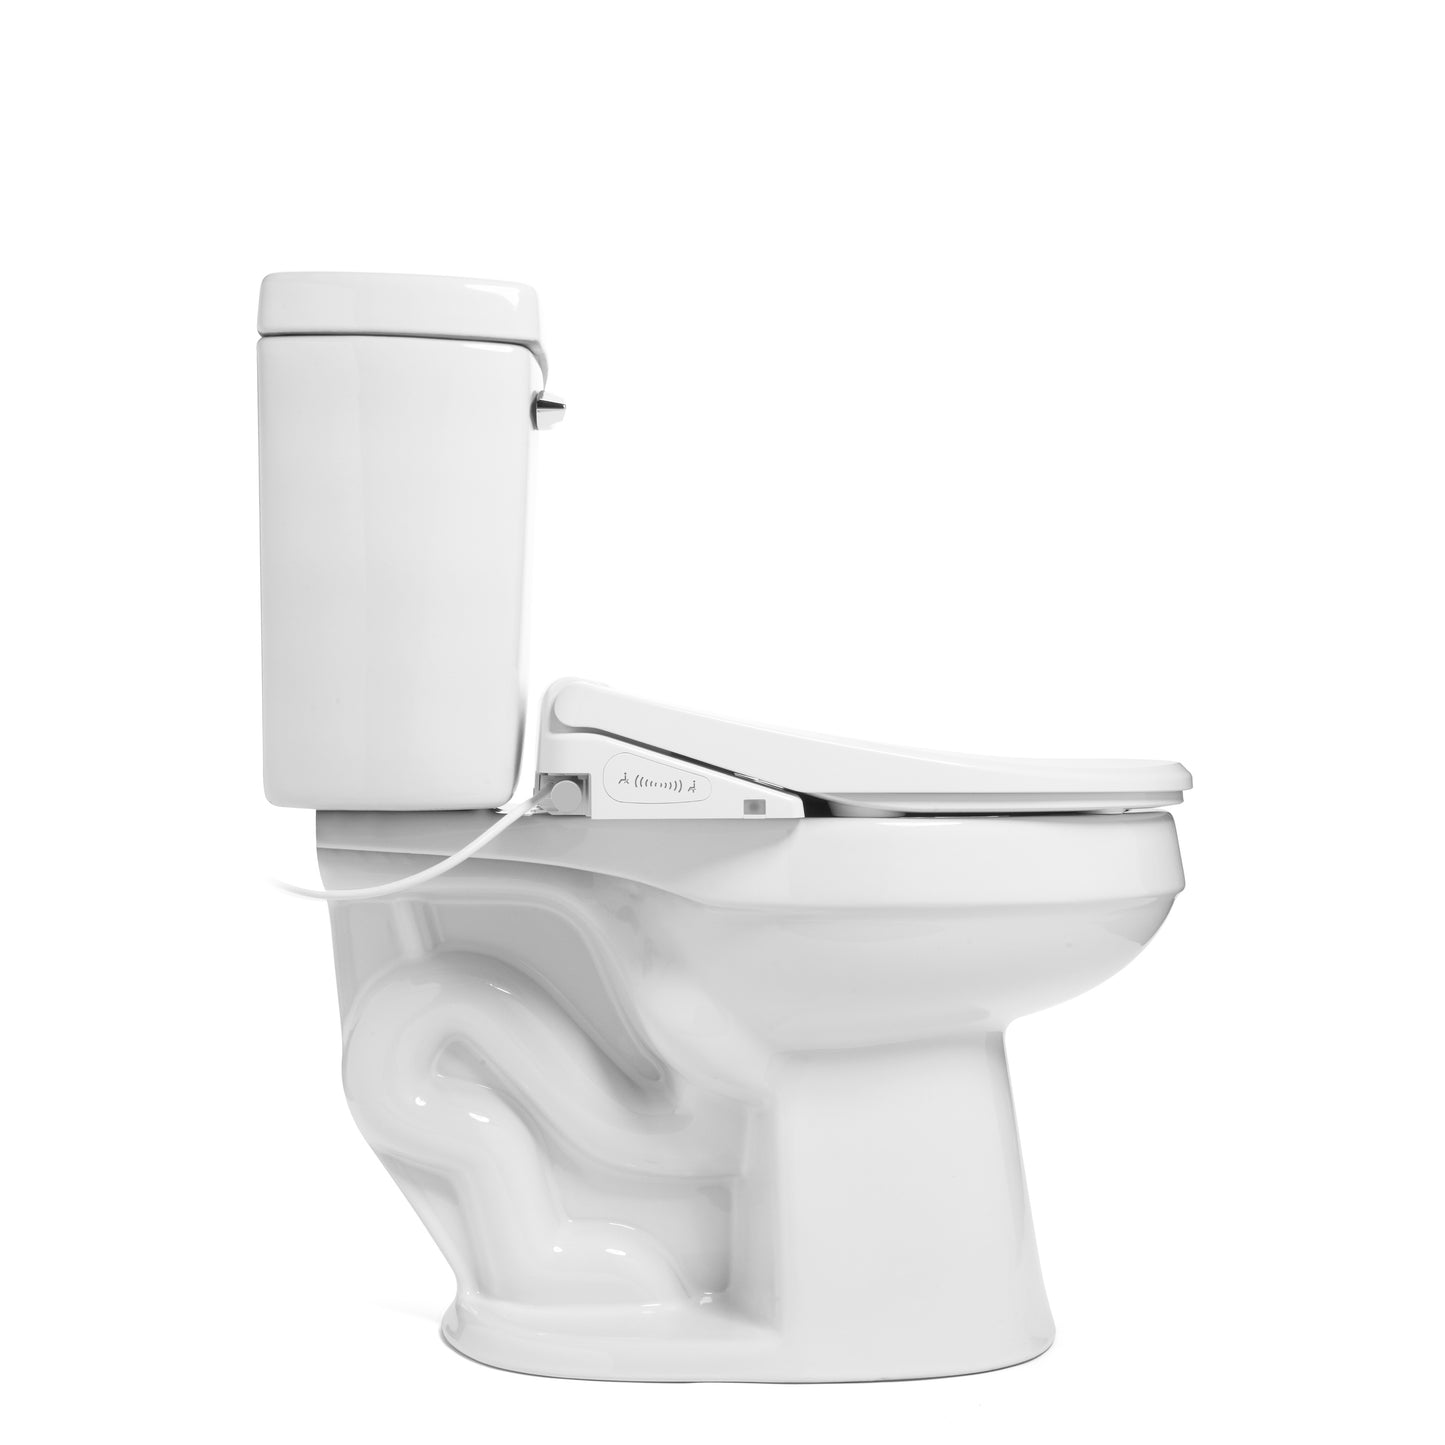 Swash Thinline T44 Smart Bidet Toilet Seat with Remote Control, Elongated or Round